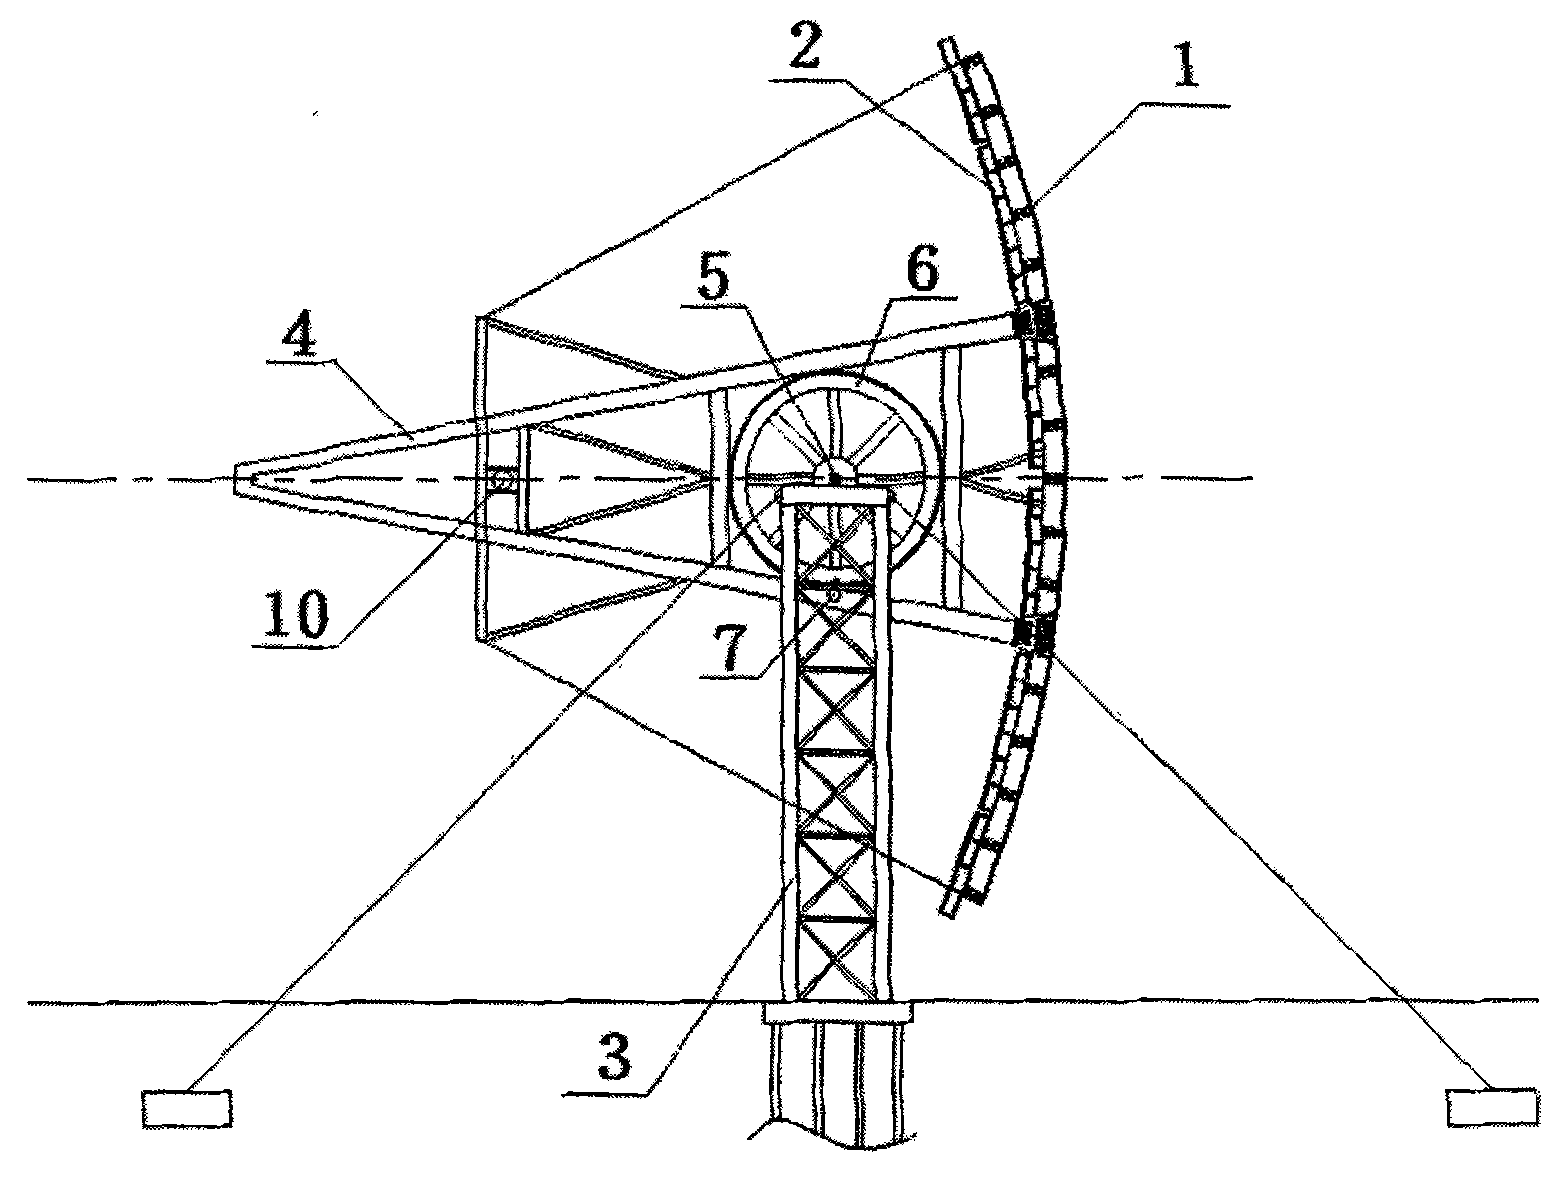 Composite working tube and solar energy steam-generating equipment